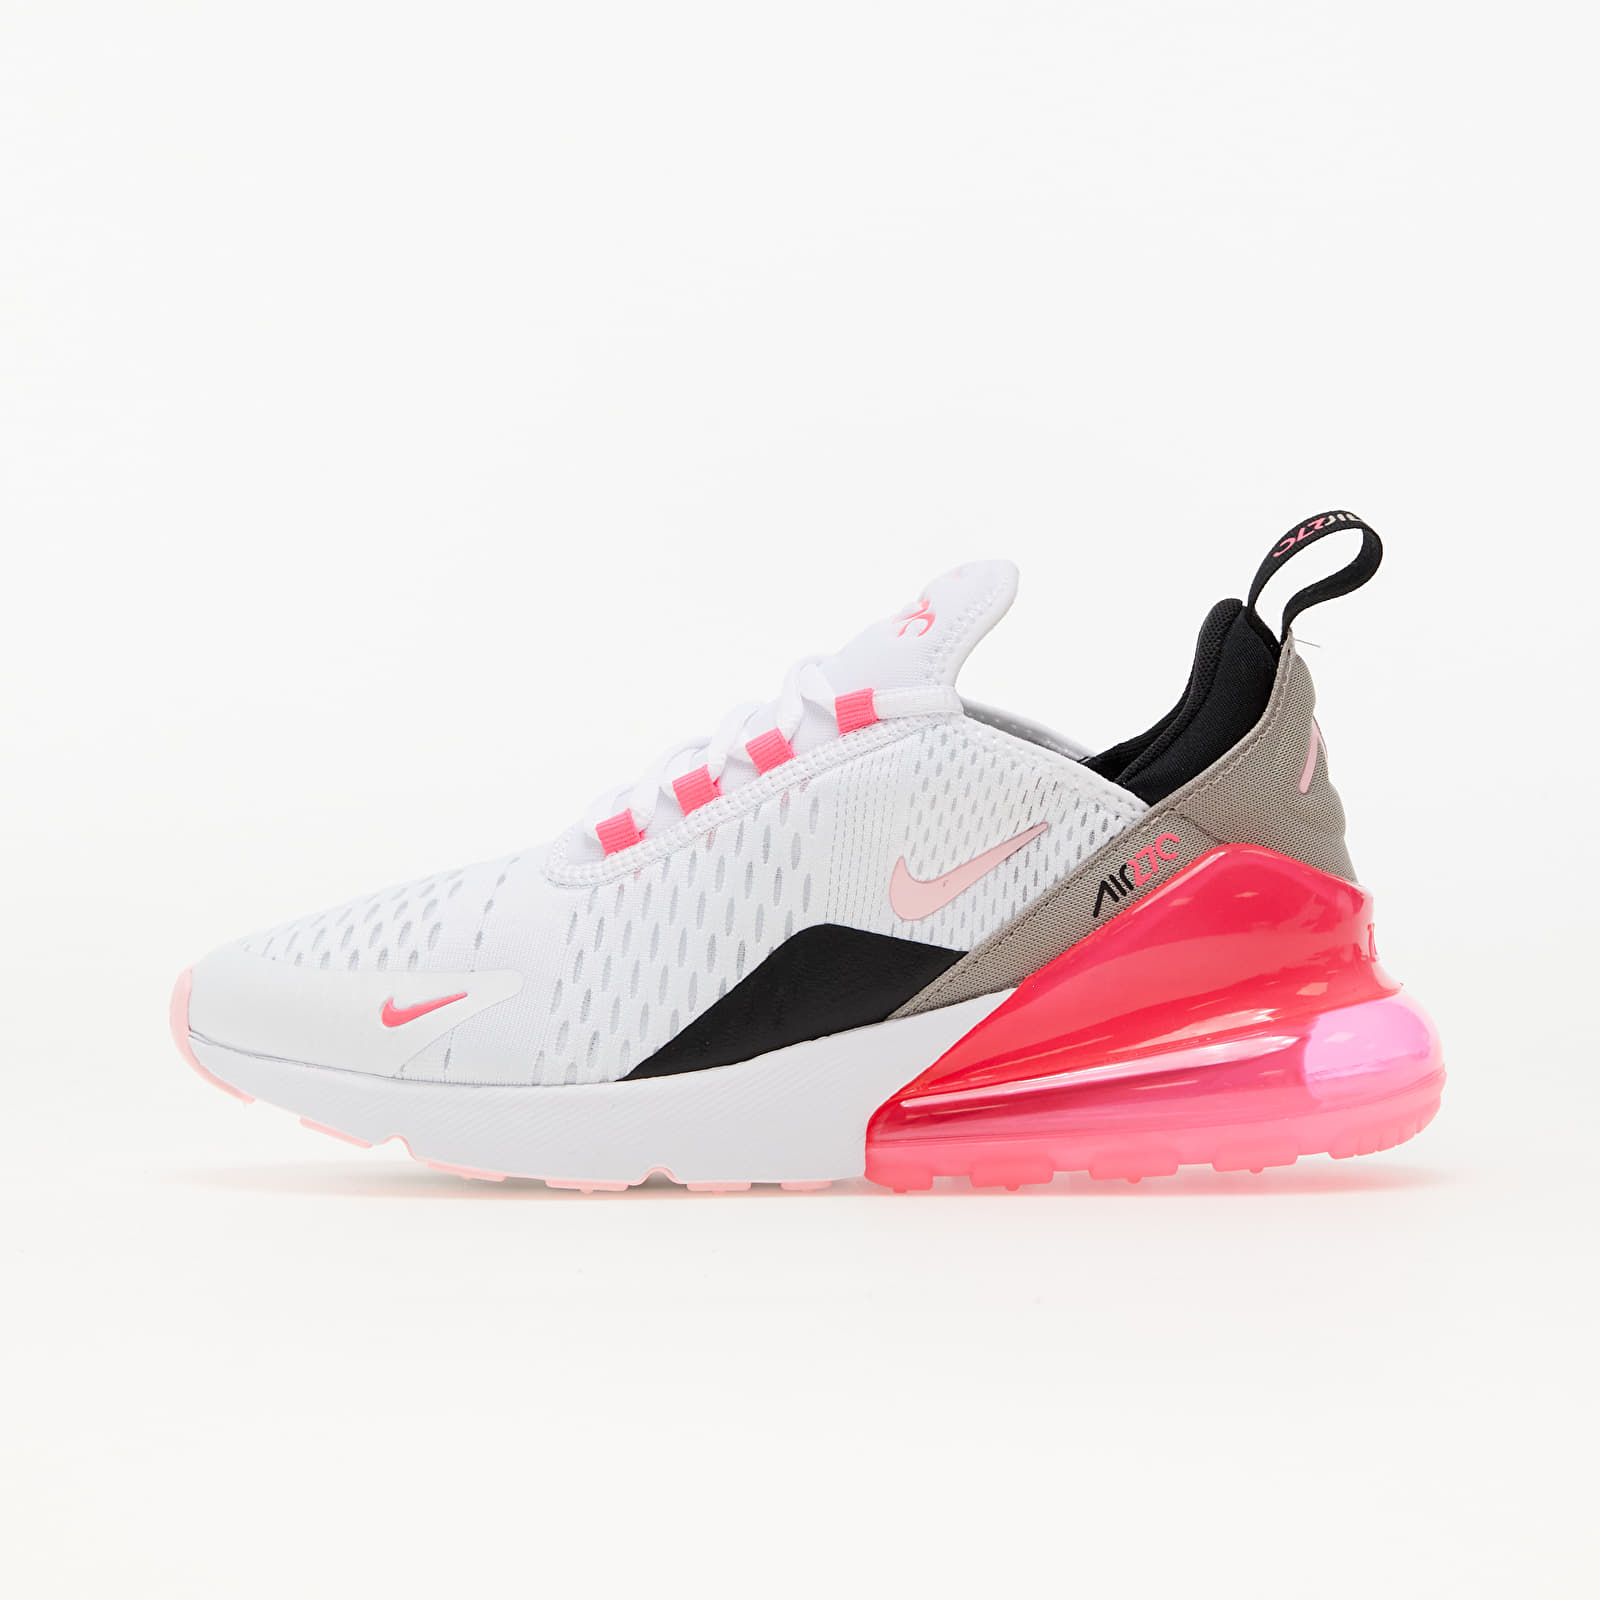 Women's shoes Nike W Air Max 270 White/ Arctic Punch-Hyper Pink-Black